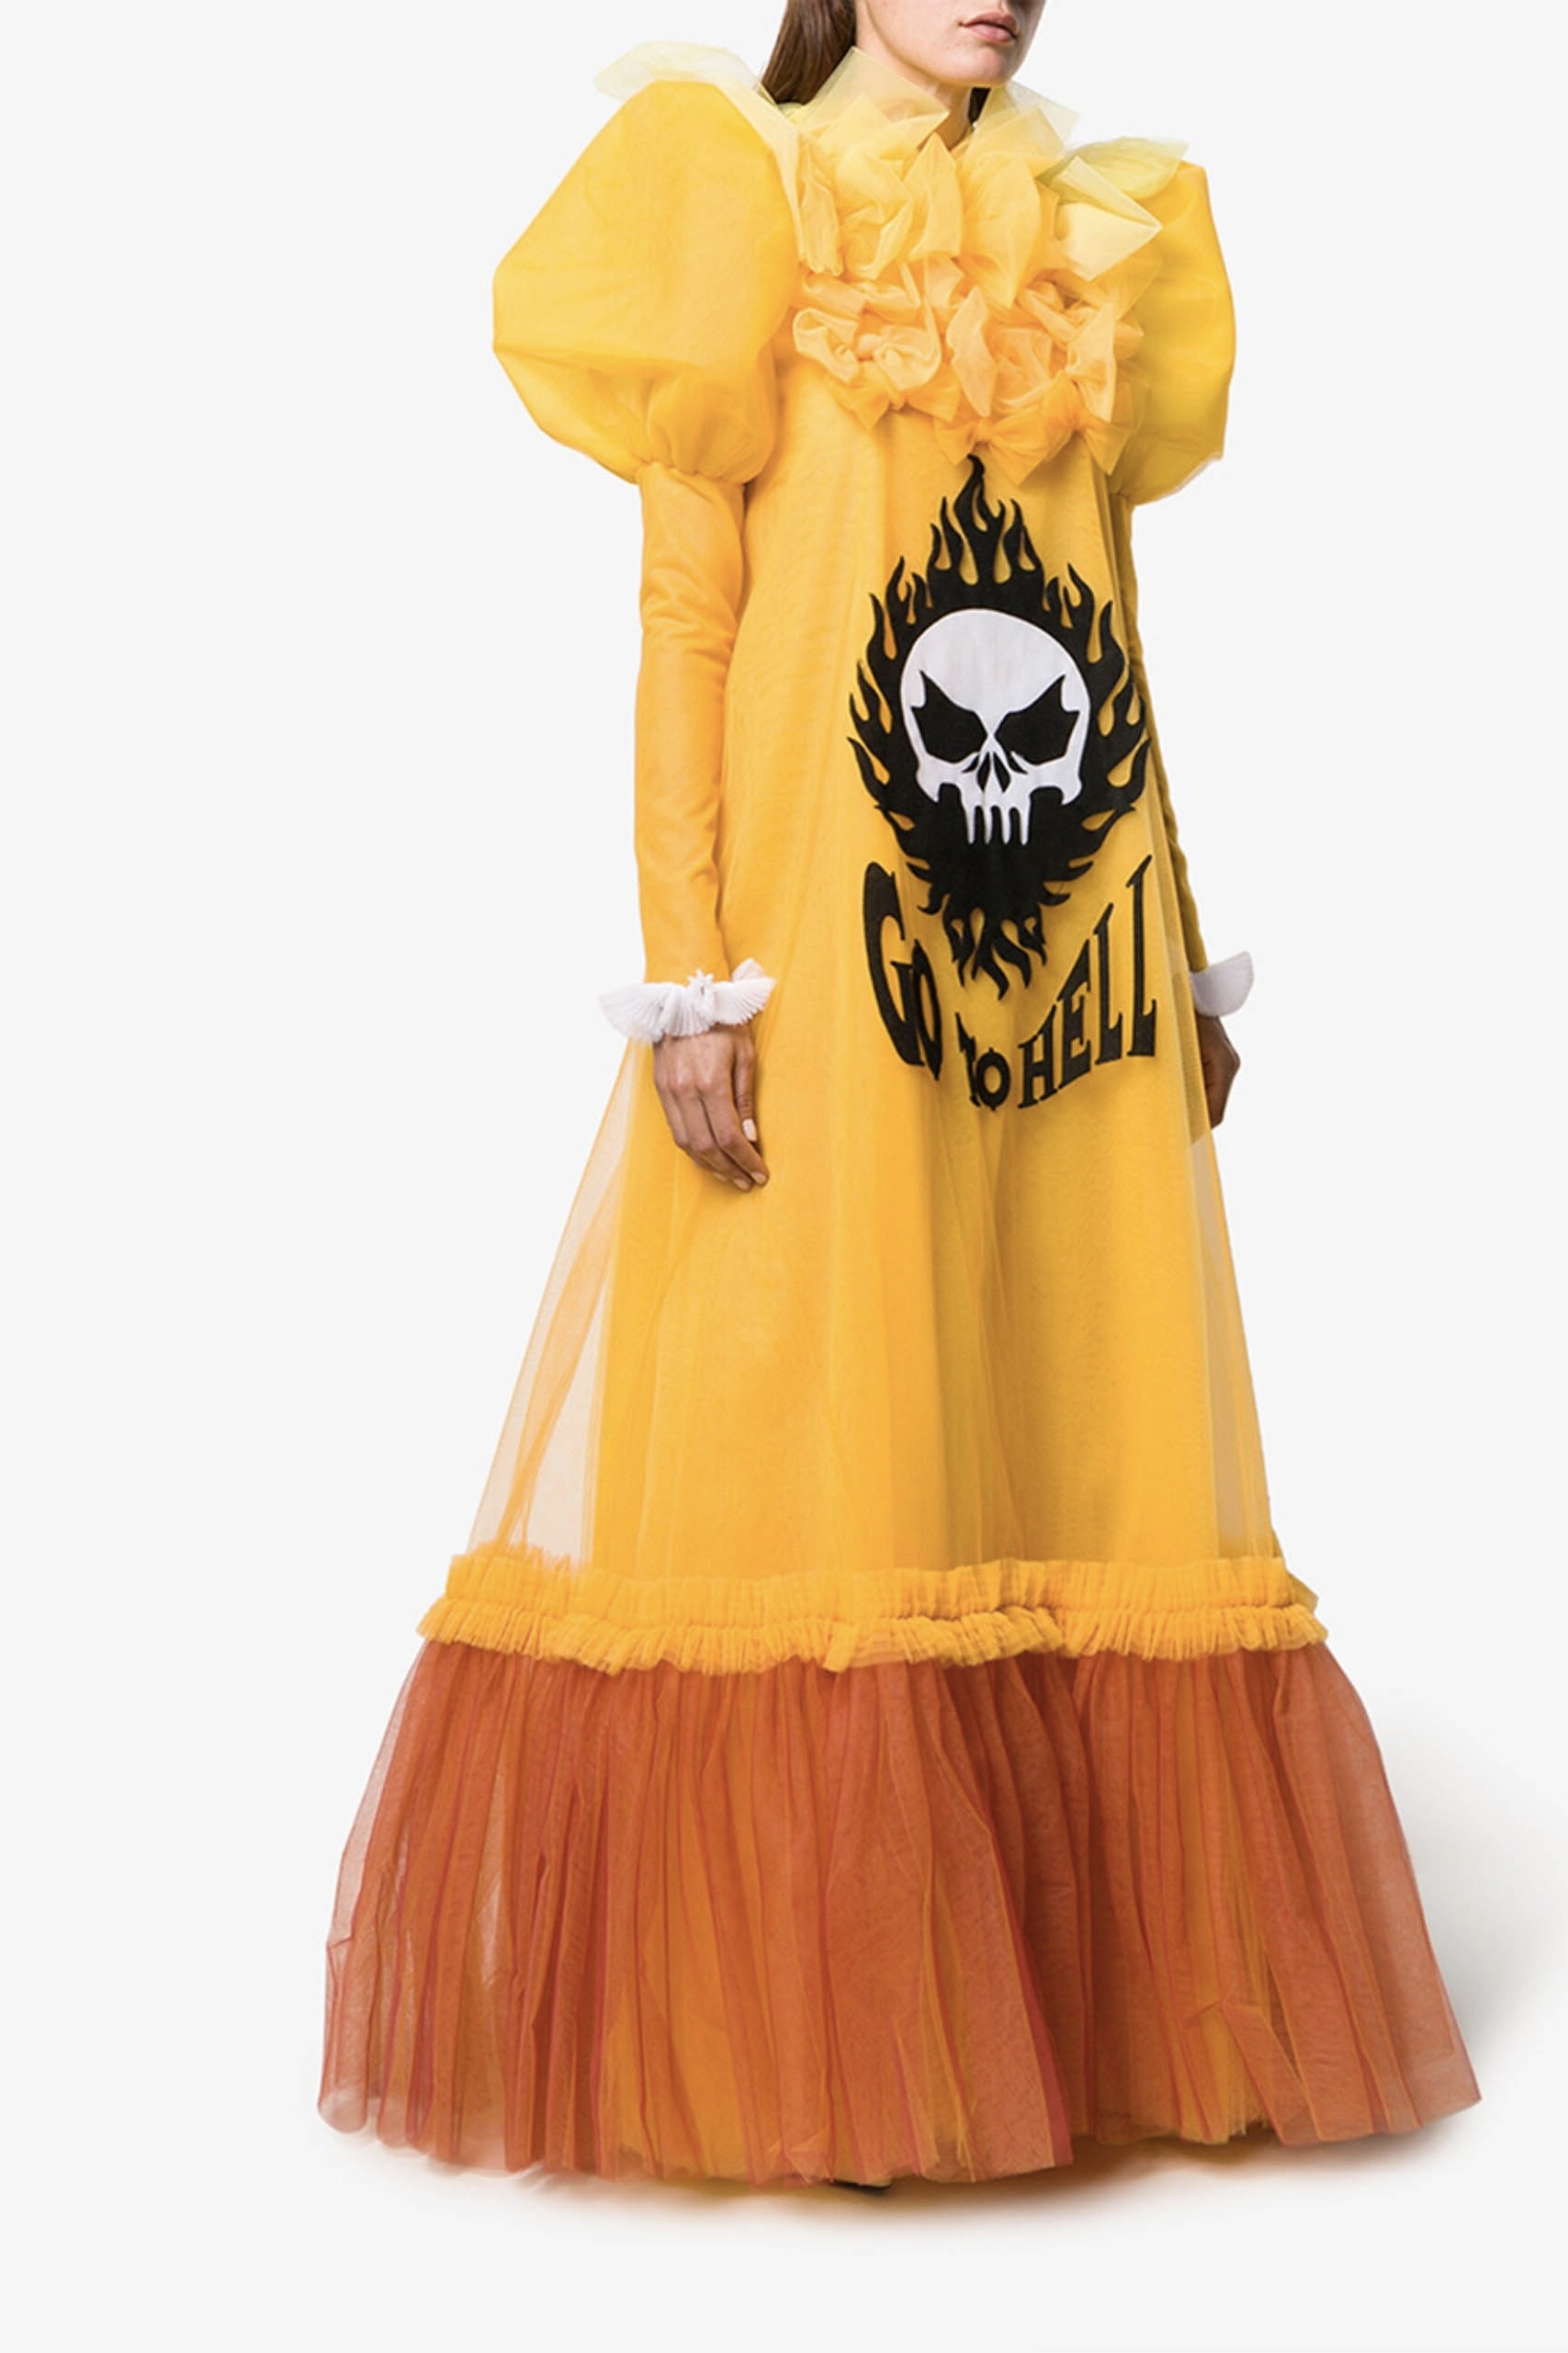 Viktor & Rolf Couture Gown Where to Buy Dress Tulle Logo Whatever $65,000 USD Price Tag Haute Couture Piece 